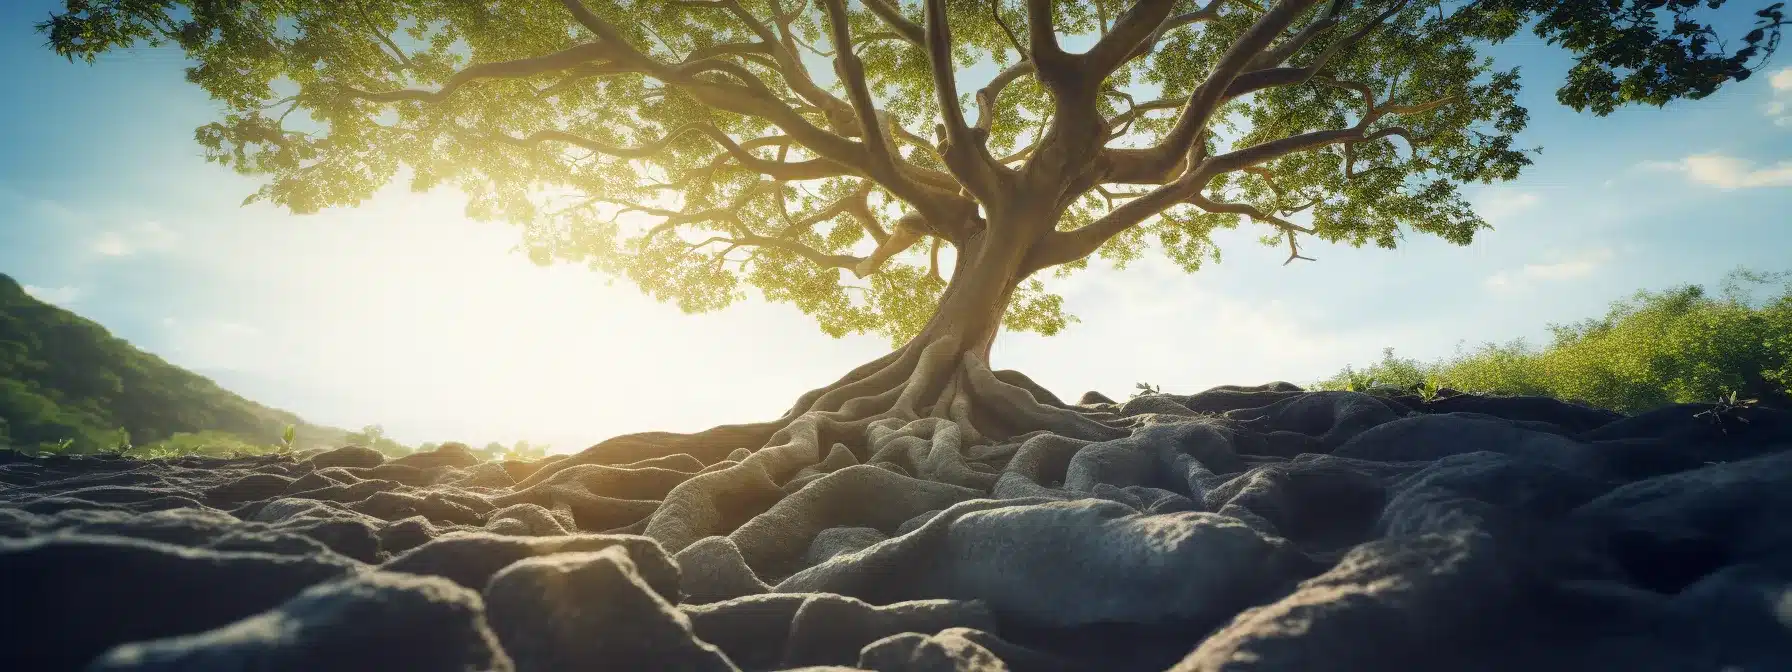 A Thriving Tree With Strong Roots And Blooming Branches, Representing The Correlation Between A Strong Corporate Culture And Successful Branding Strategies.